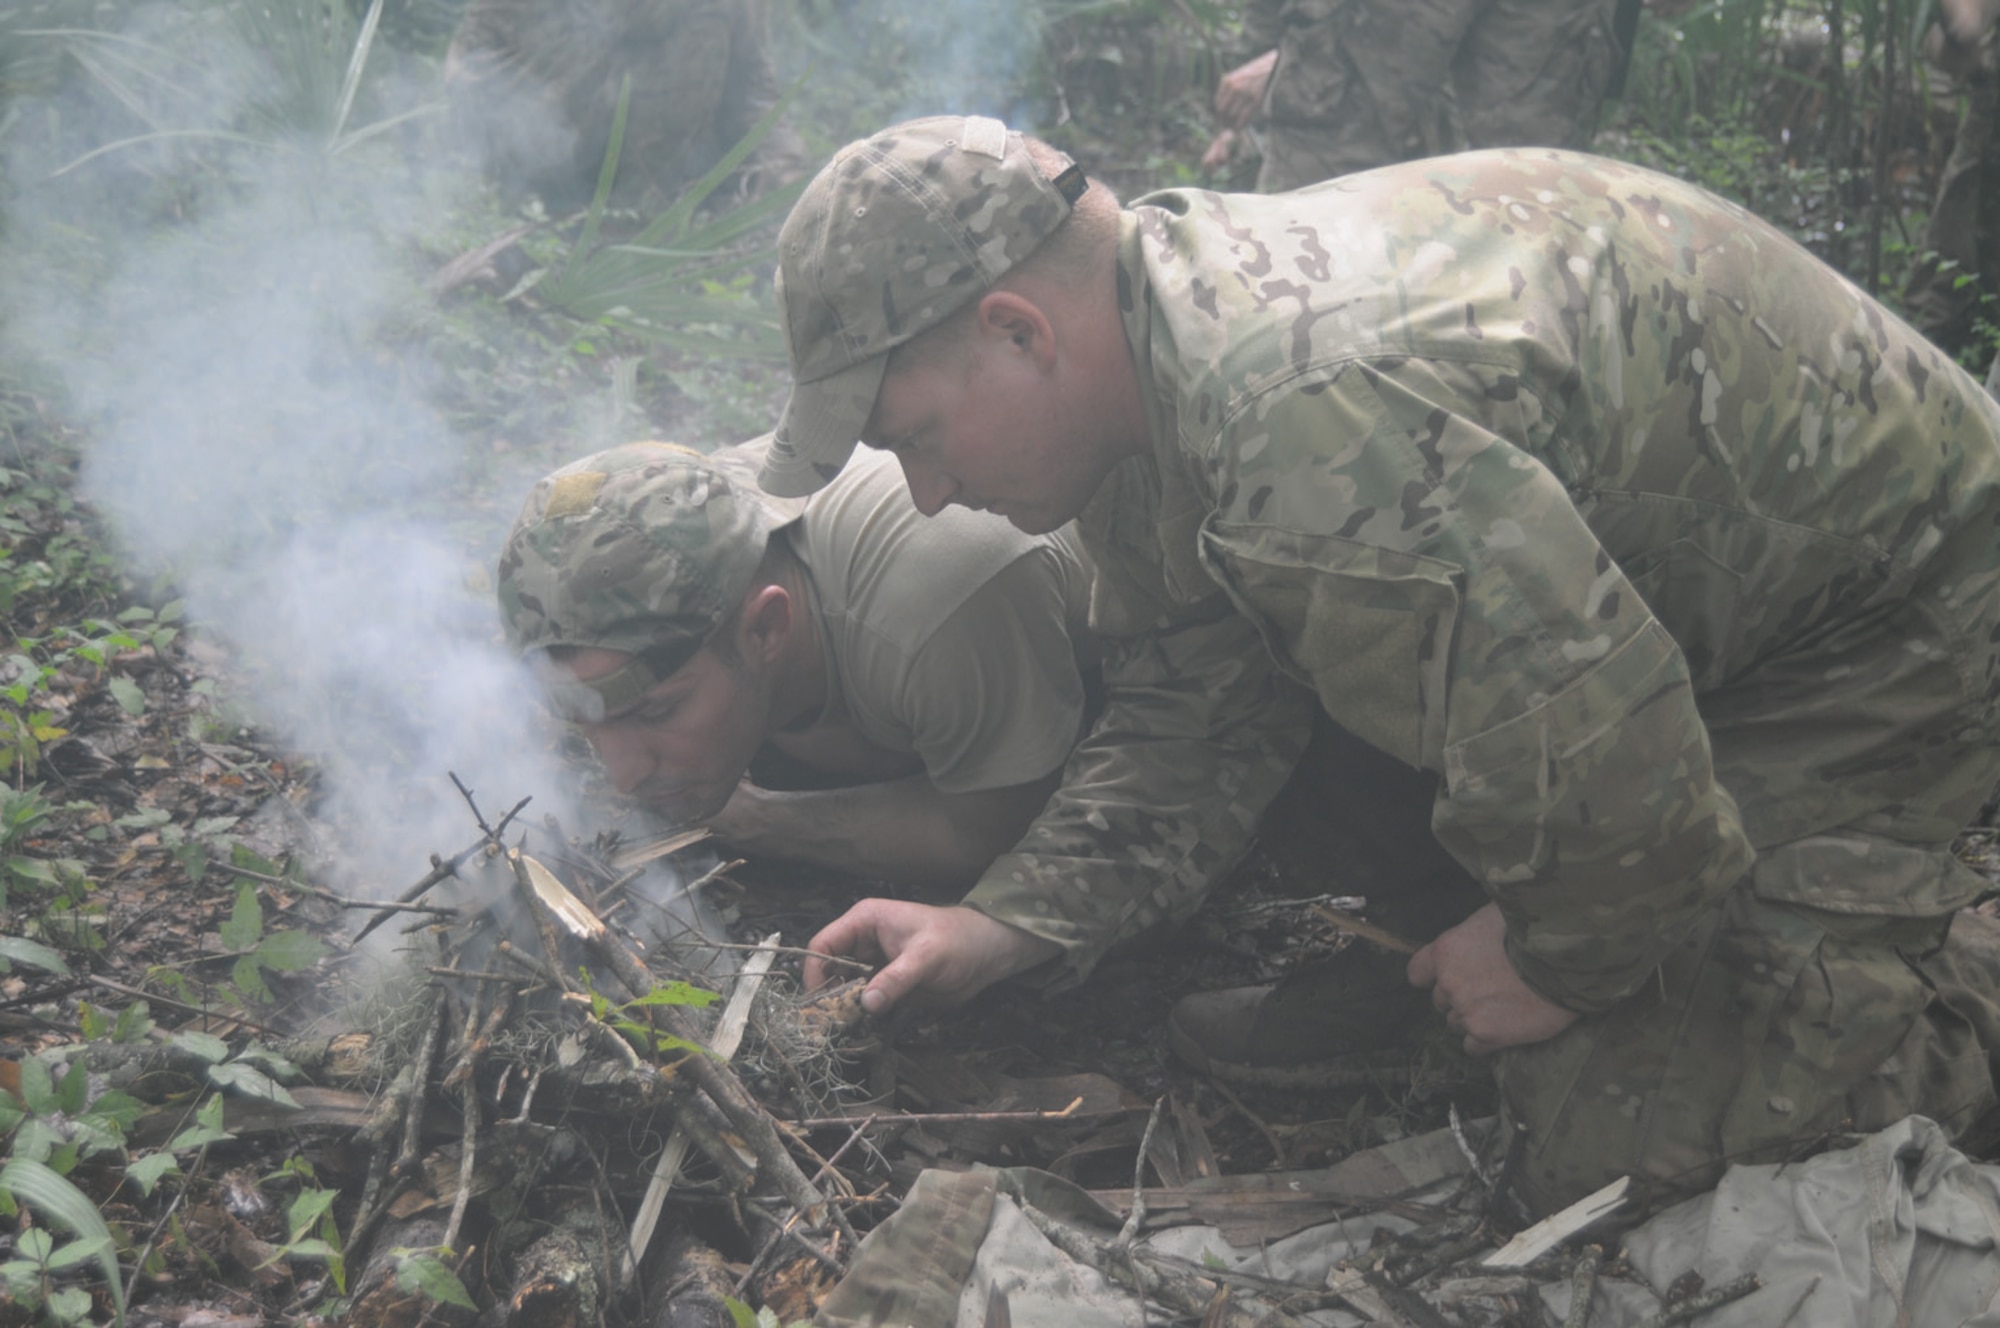 Two students work on their fire during the fire challenge –– a competition to see who can get a knee-high, maintainable fire going first –– during a tropical environment survival exercise in Louisiana's Atchafalaya Basin Aug. 30-Sept. 1. (U.S. Army photo by Jean Dubiel)